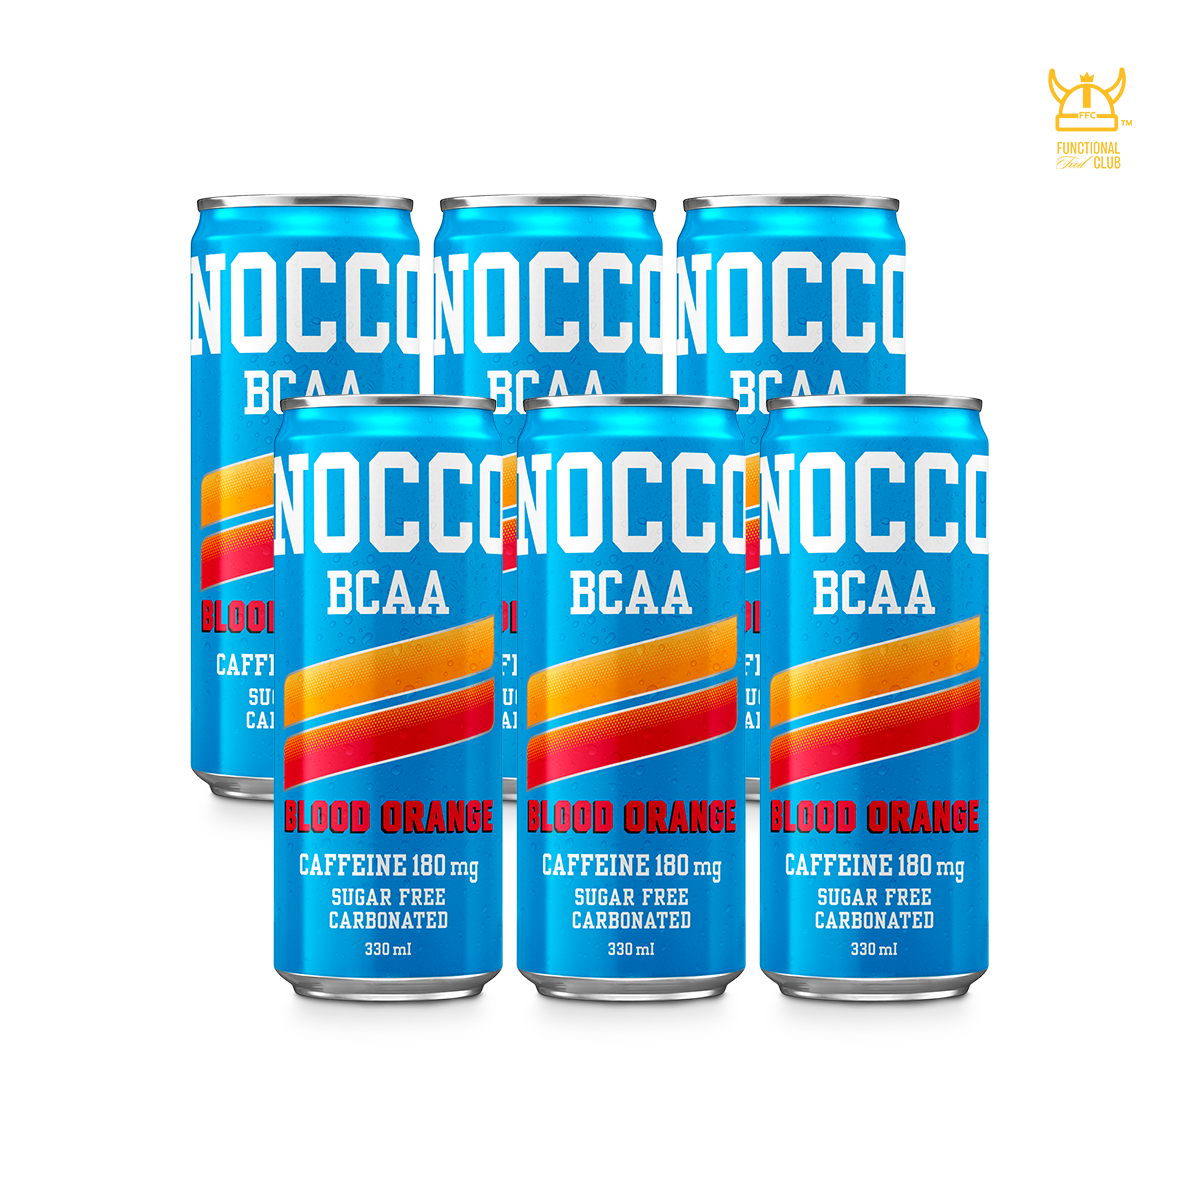 NOCCO BCAA Multi-vitamins Performance Drink - BLOOD ORANGE (Caffeinated) 6 Cans